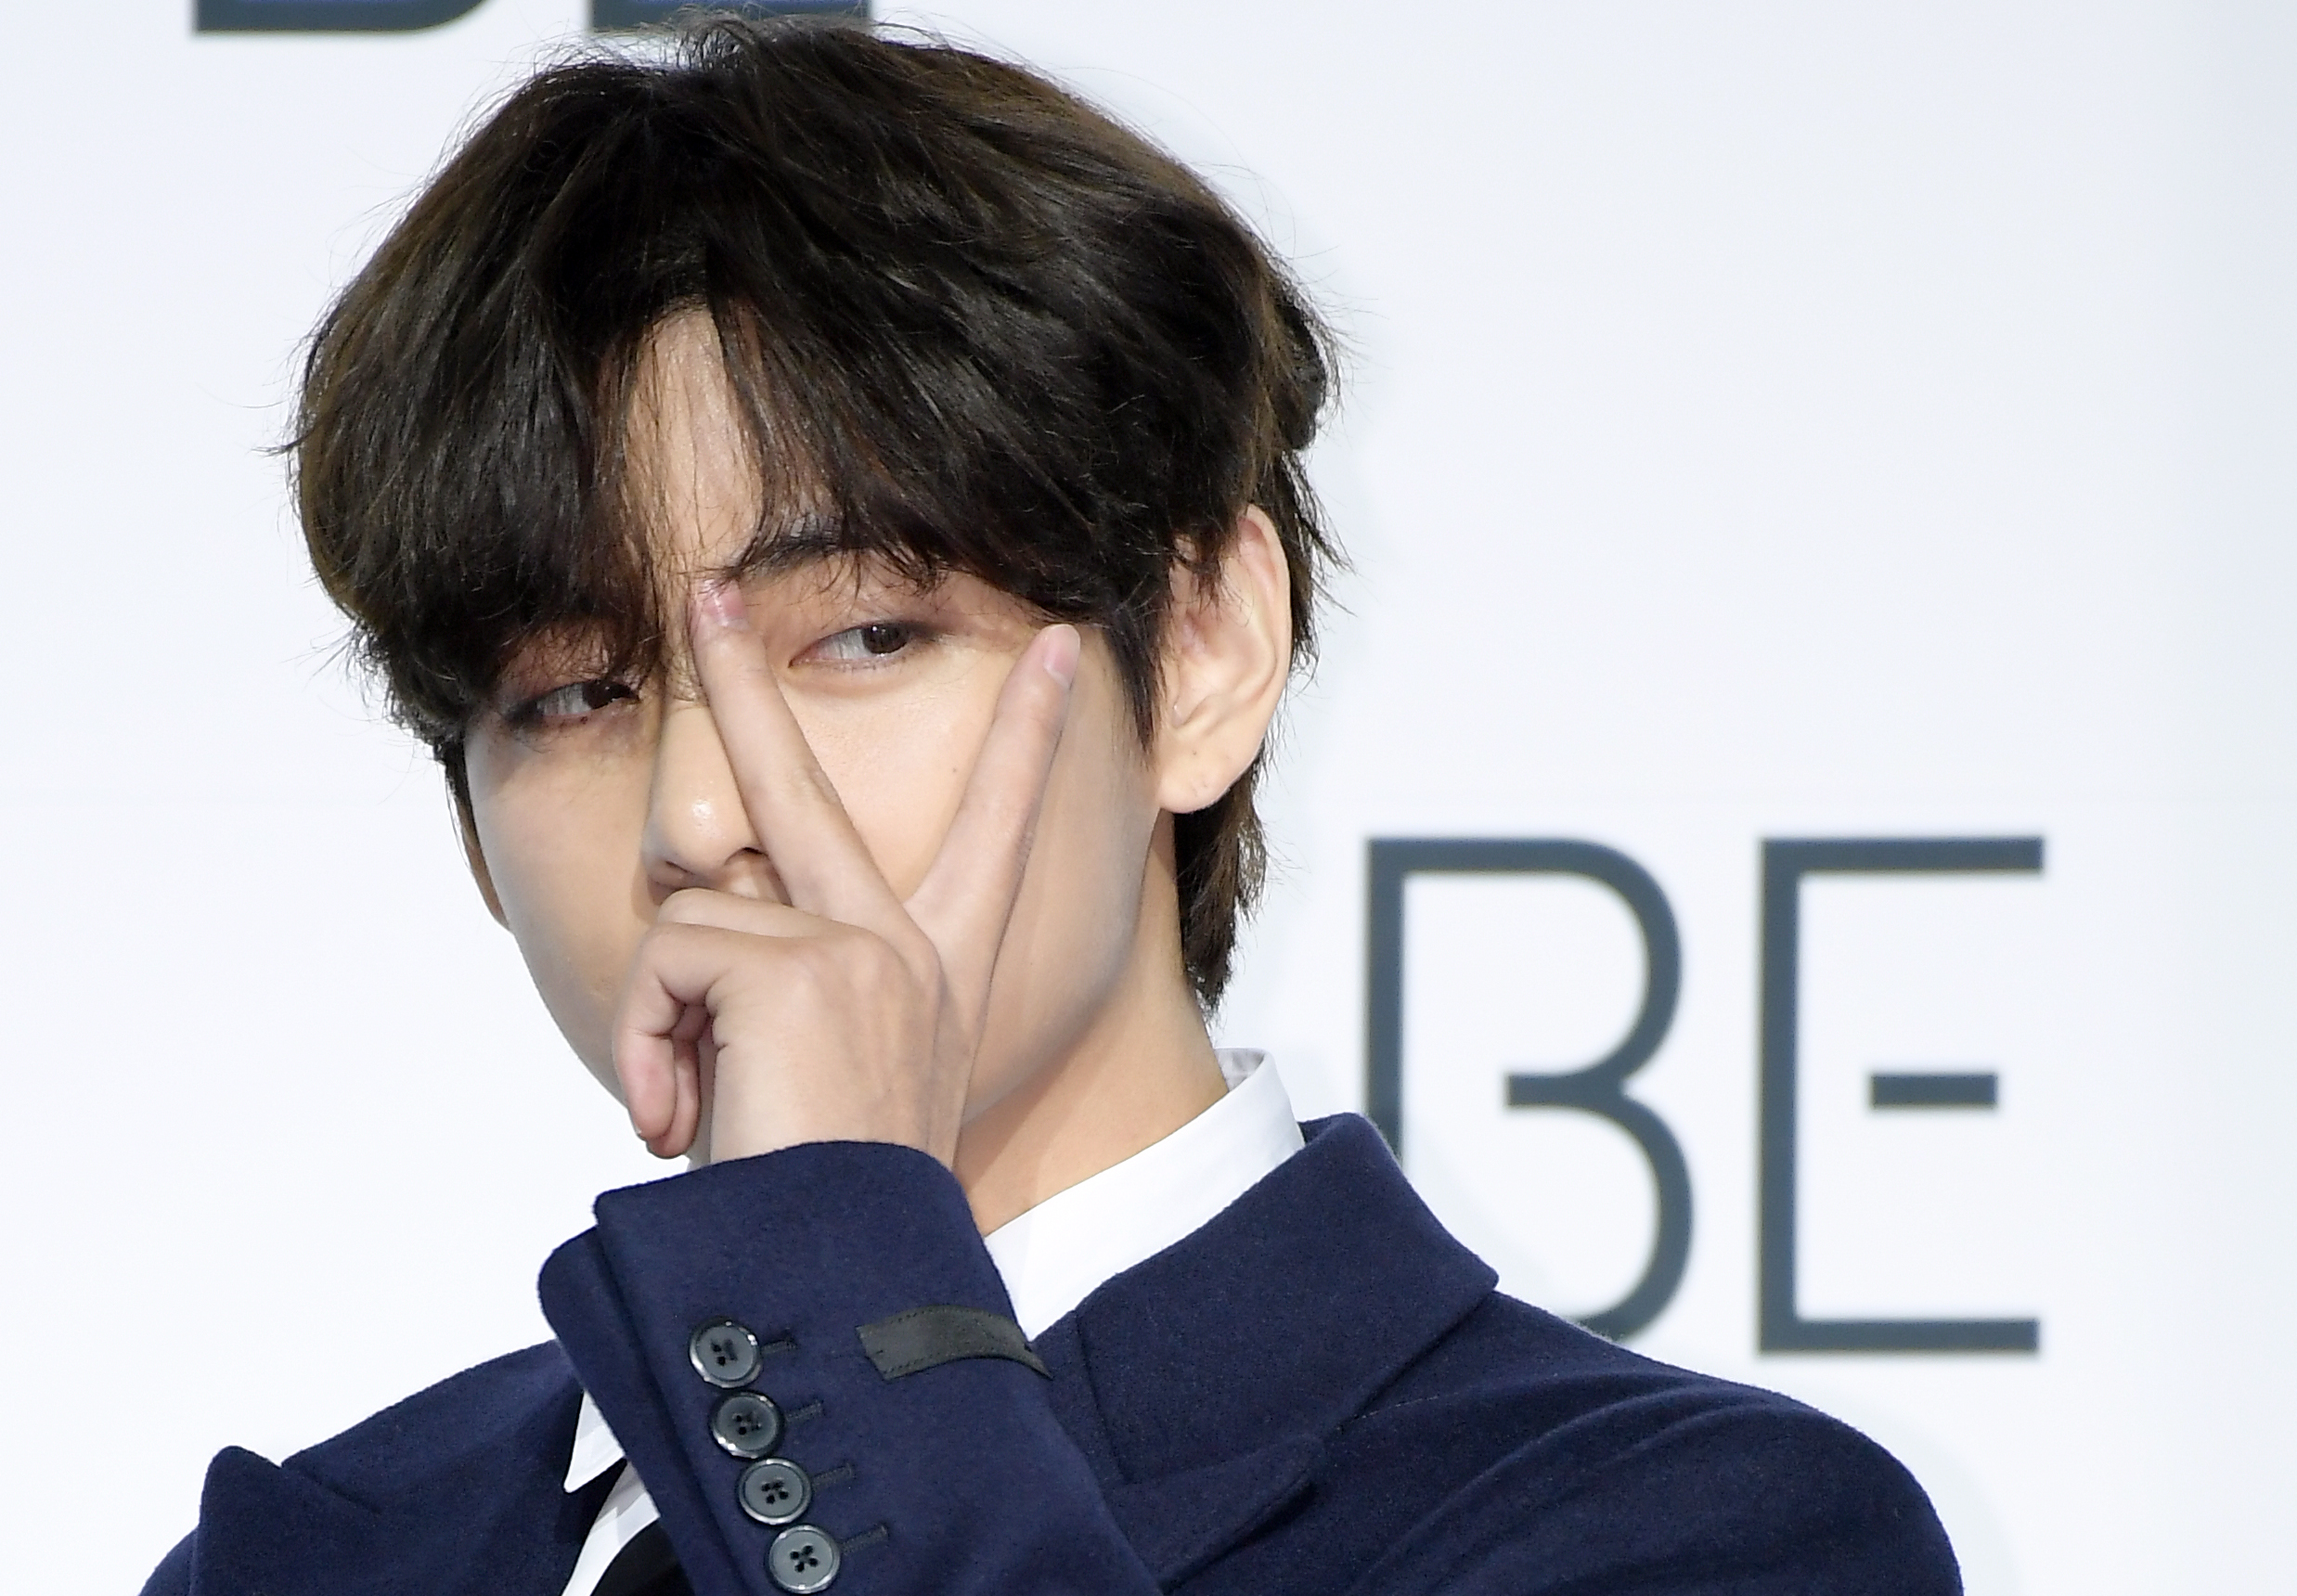 V of BTS holds up the peace sign during the band's press conference for 'BE"